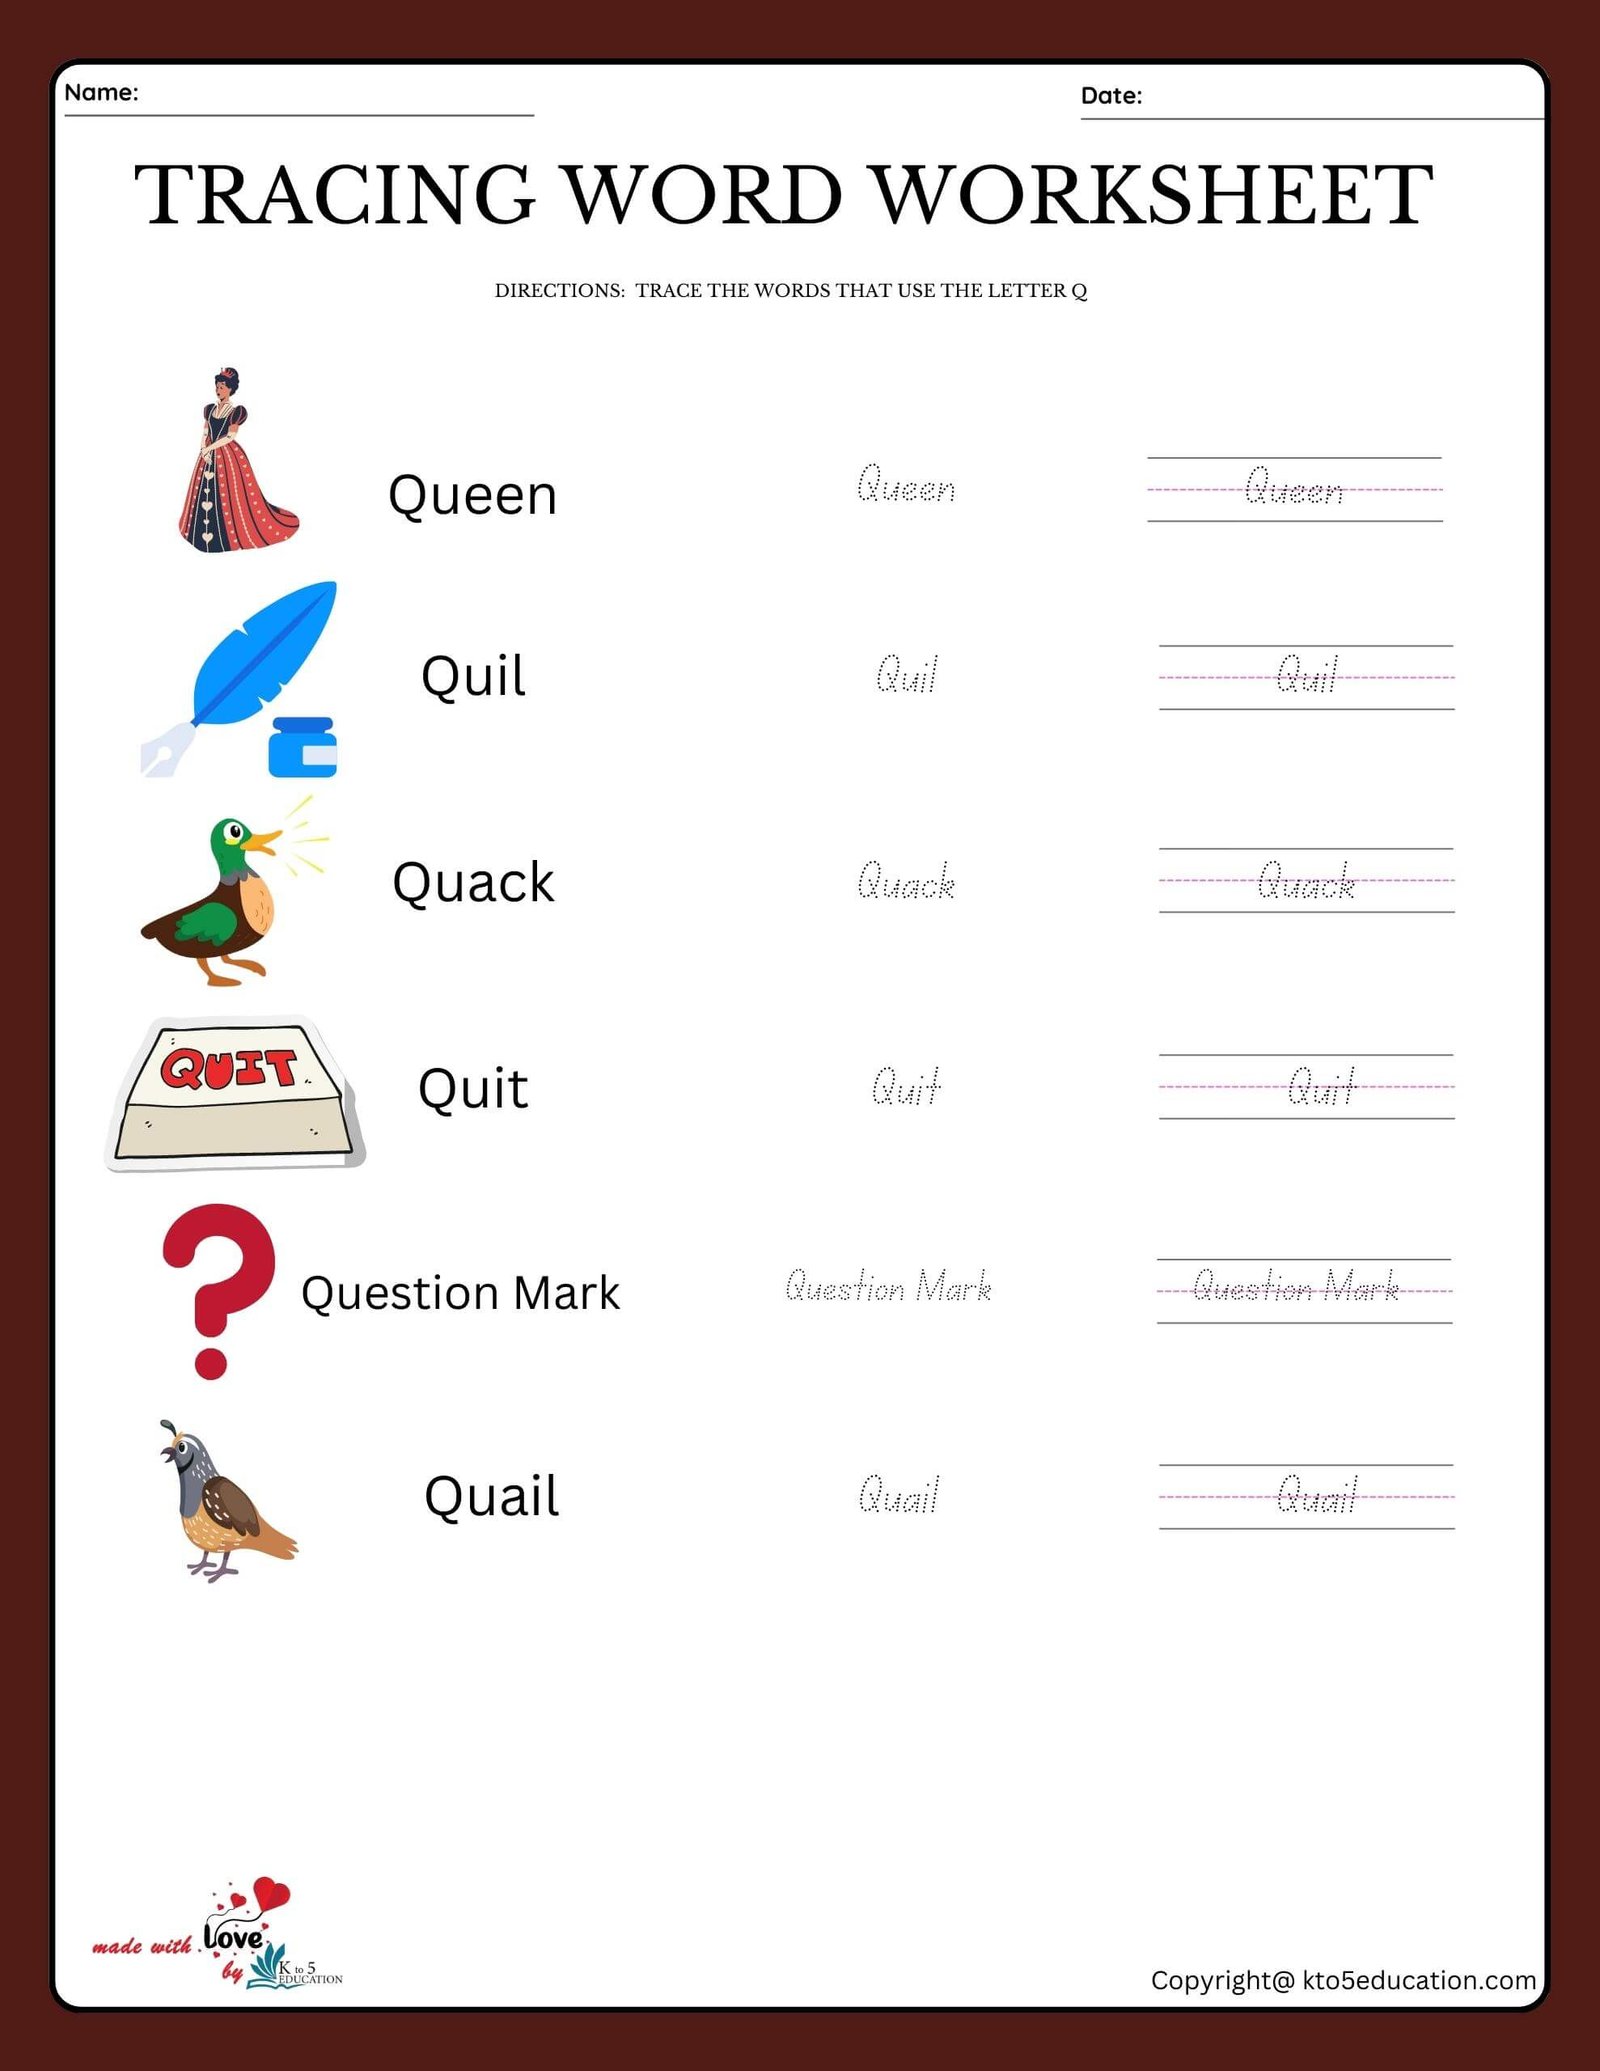 Trace The Words That Use The Letter Q Worksheet